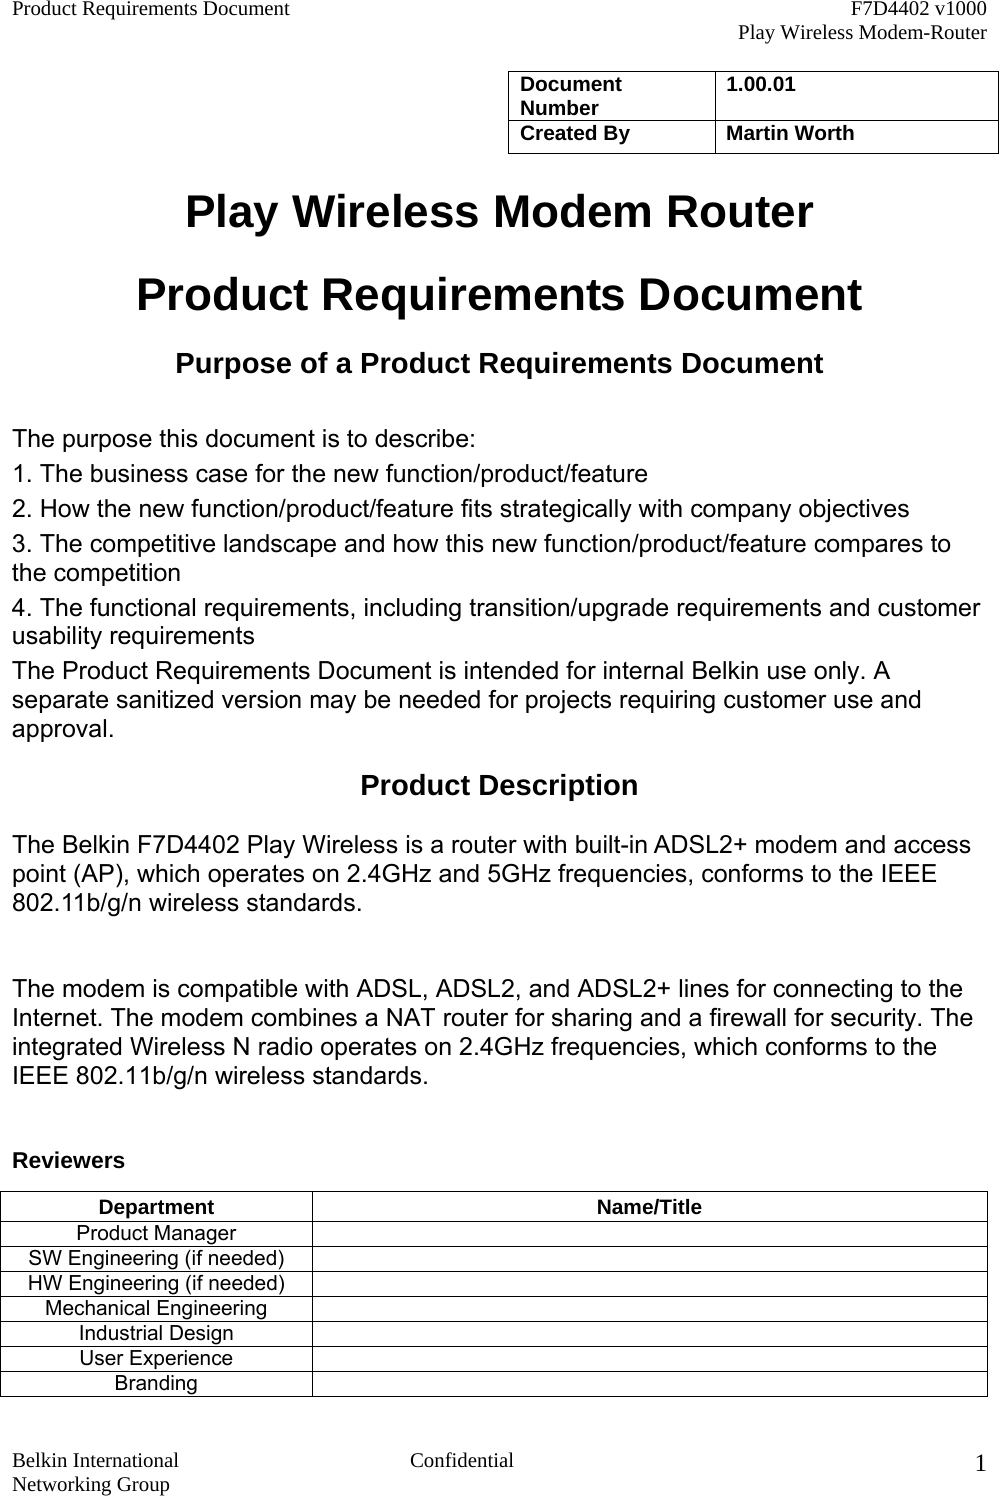 Product Requirements Document    F7D4402 v1000     Play Wireless Modem-Router  Belkin International  Confidential Networking Group 1Document Number  1.00.01   Created By  Martin Worth Play Wireless Modem Router  Product Requirements Document Purpose of a Product Requirements Document  The purpose this document is to describe: 1. The business case for the new function/product/feature 2. How the new function/product/feature fits strategically with company objectives 3. The competitive landscape and how this new function/product/feature compares to the competition 4. The functional requirements, including transition/upgrade requirements and customer usability requirements The Product Requirements Document is intended for internal Belkin use only. A separate sanitized version may be needed for projects requiring customer use and approval. Product Description The Belkin F7D4402 Play Wireless is a router with built-in ADSL2+ modem and access point (AP), which operates on 2.4GHz and 5GHz frequencies, conforms to the IEEE 802.11b/g/n wireless standards.  The modem is compatible with ADSL, ADSL2, and ADSL2+ lines for connecting to the Internet. The modem combines a NAT router for sharing and a firewall for security. The integrated Wireless N radio operates on 2.4GHz frequencies, which conforms to the IEEE 802.11b/g/n wireless standards.  Reviewers Department Name/Title Product Manager   SW Engineering (if needed)   HW Engineering (if needed)   Mechanical Engineering   Industrial Design   User Experience   Branding  